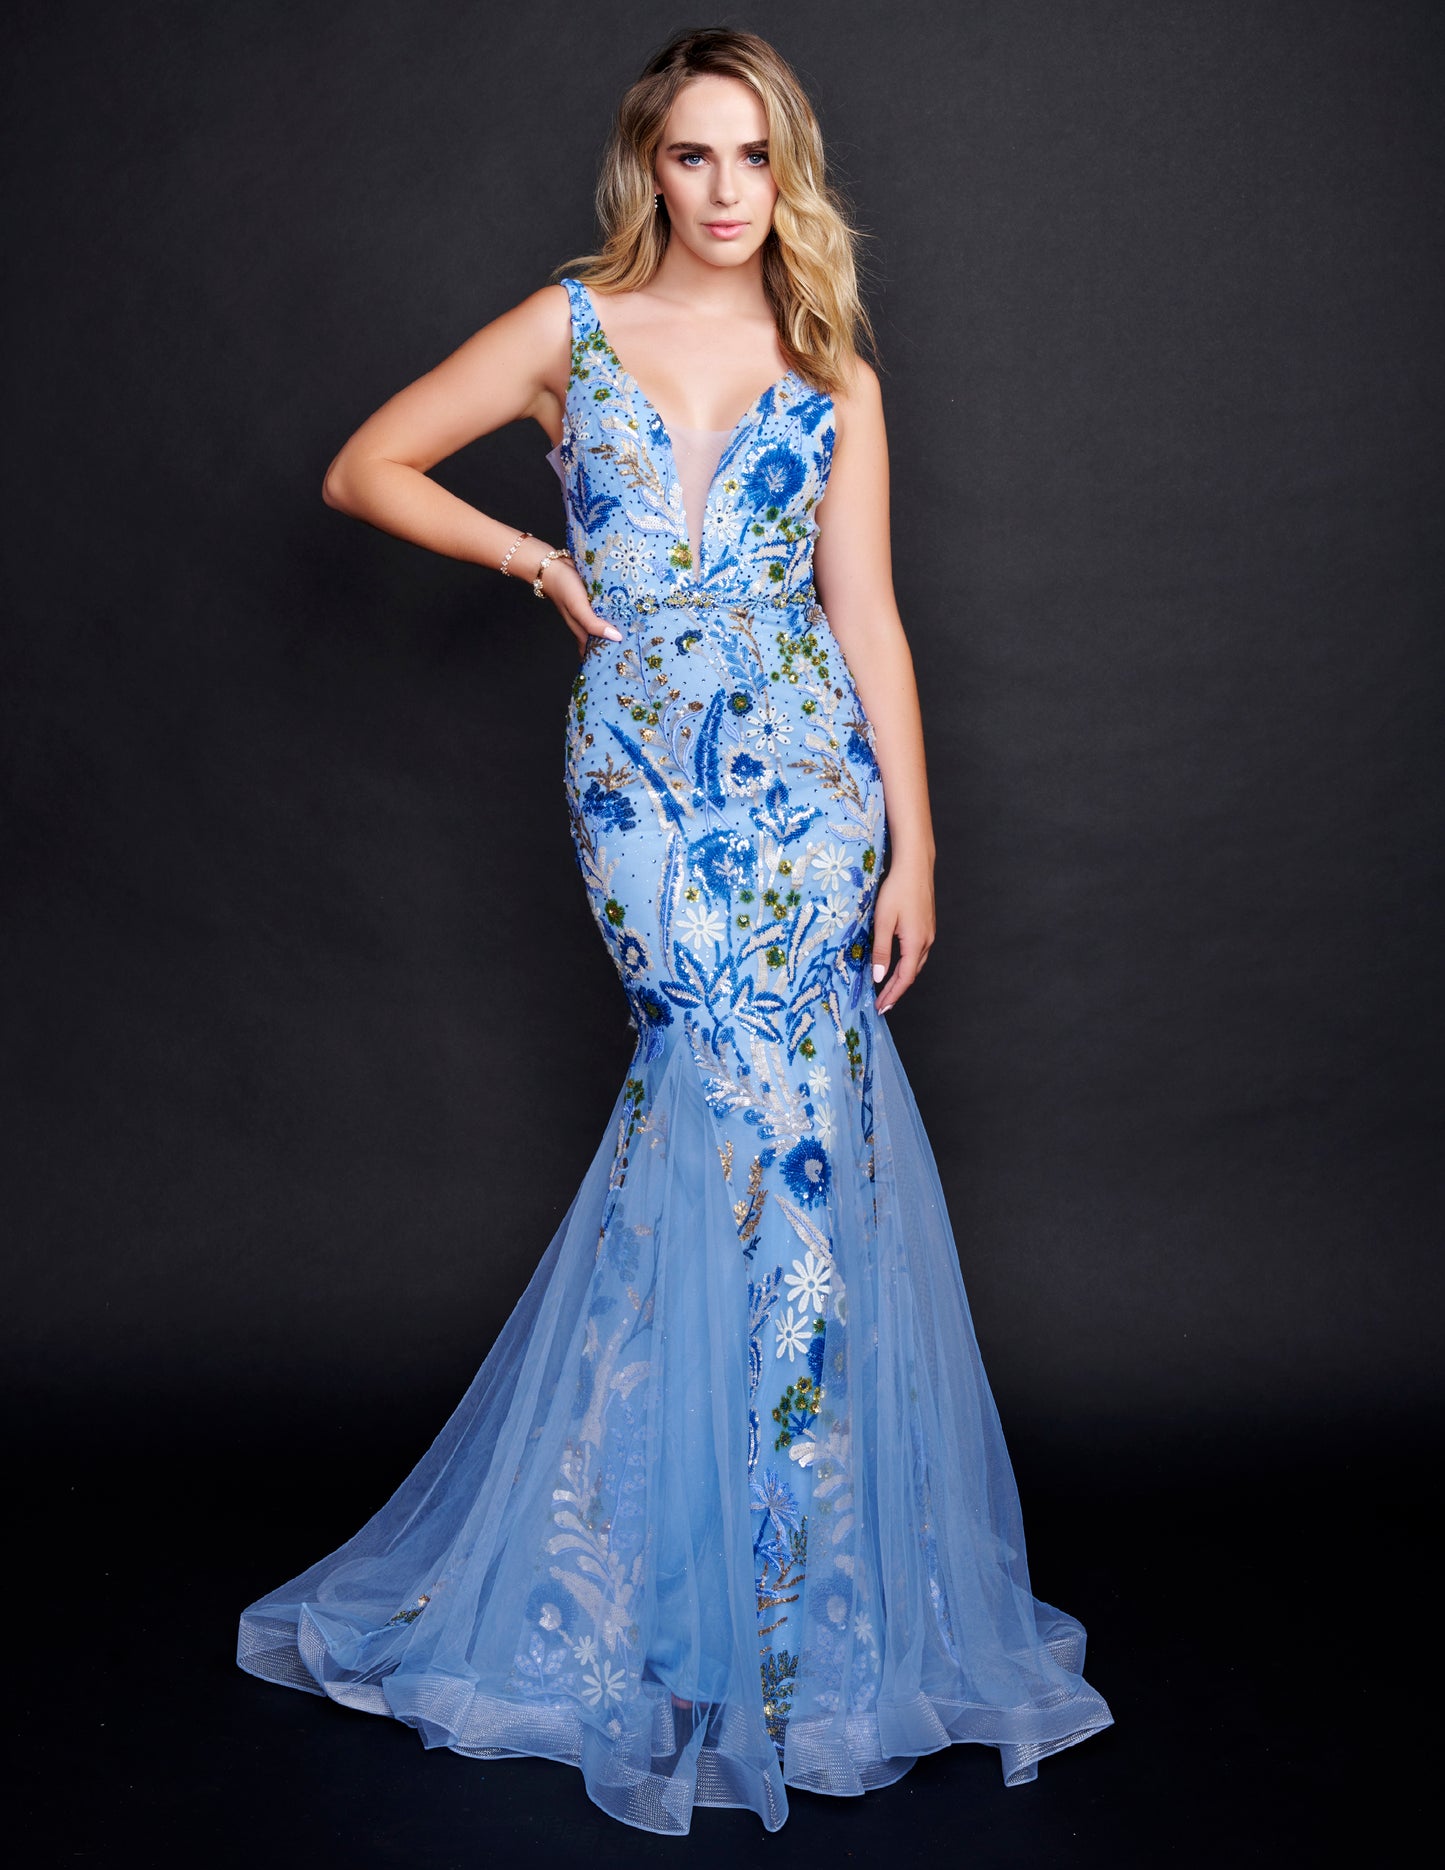 Nina Canacci 8215 Blue Floral Sequins Print Prom Dress with V neckline mermaid skirt with tulle godets and backless